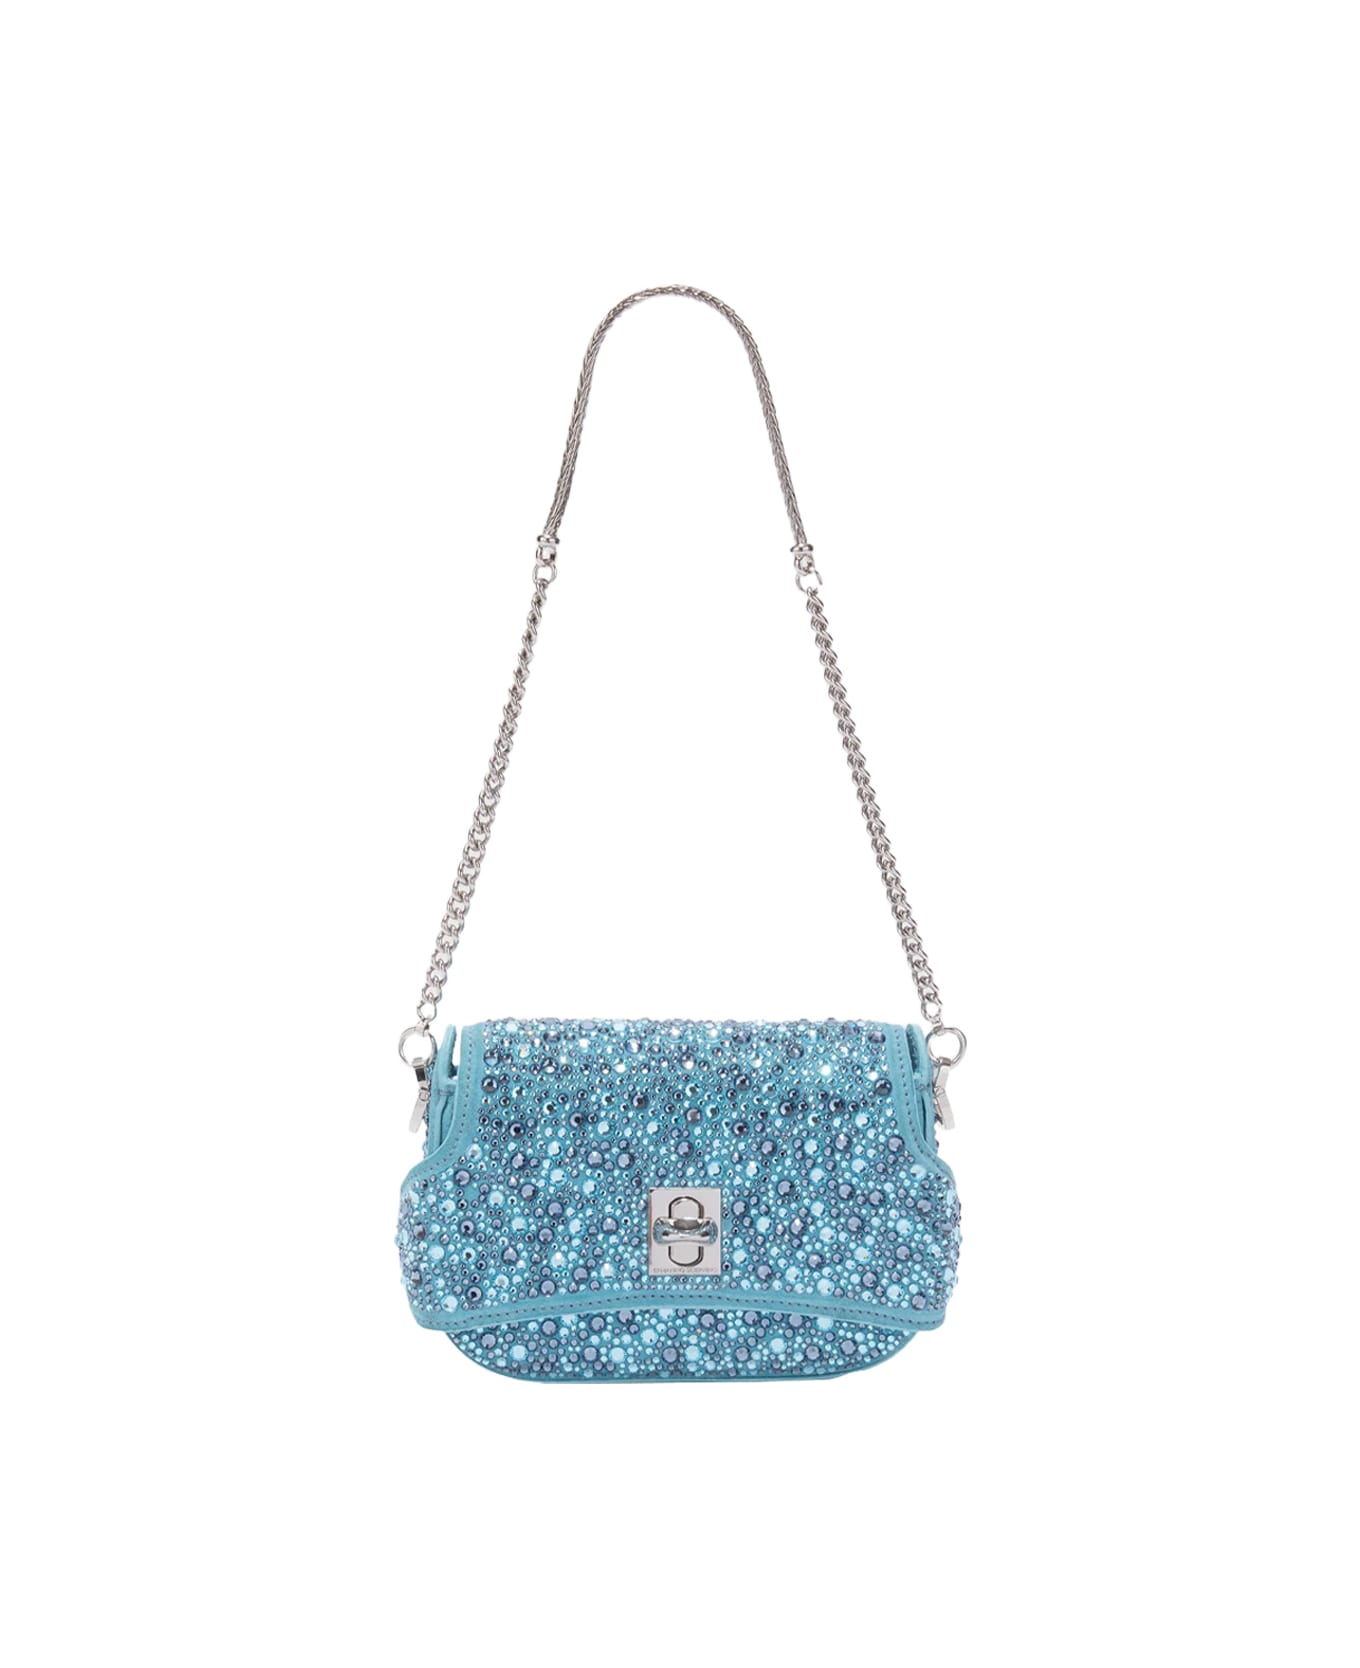 Ermanno Scervino Light Blue Audrey Bag With Crystals - Blue ショルダーバッグ